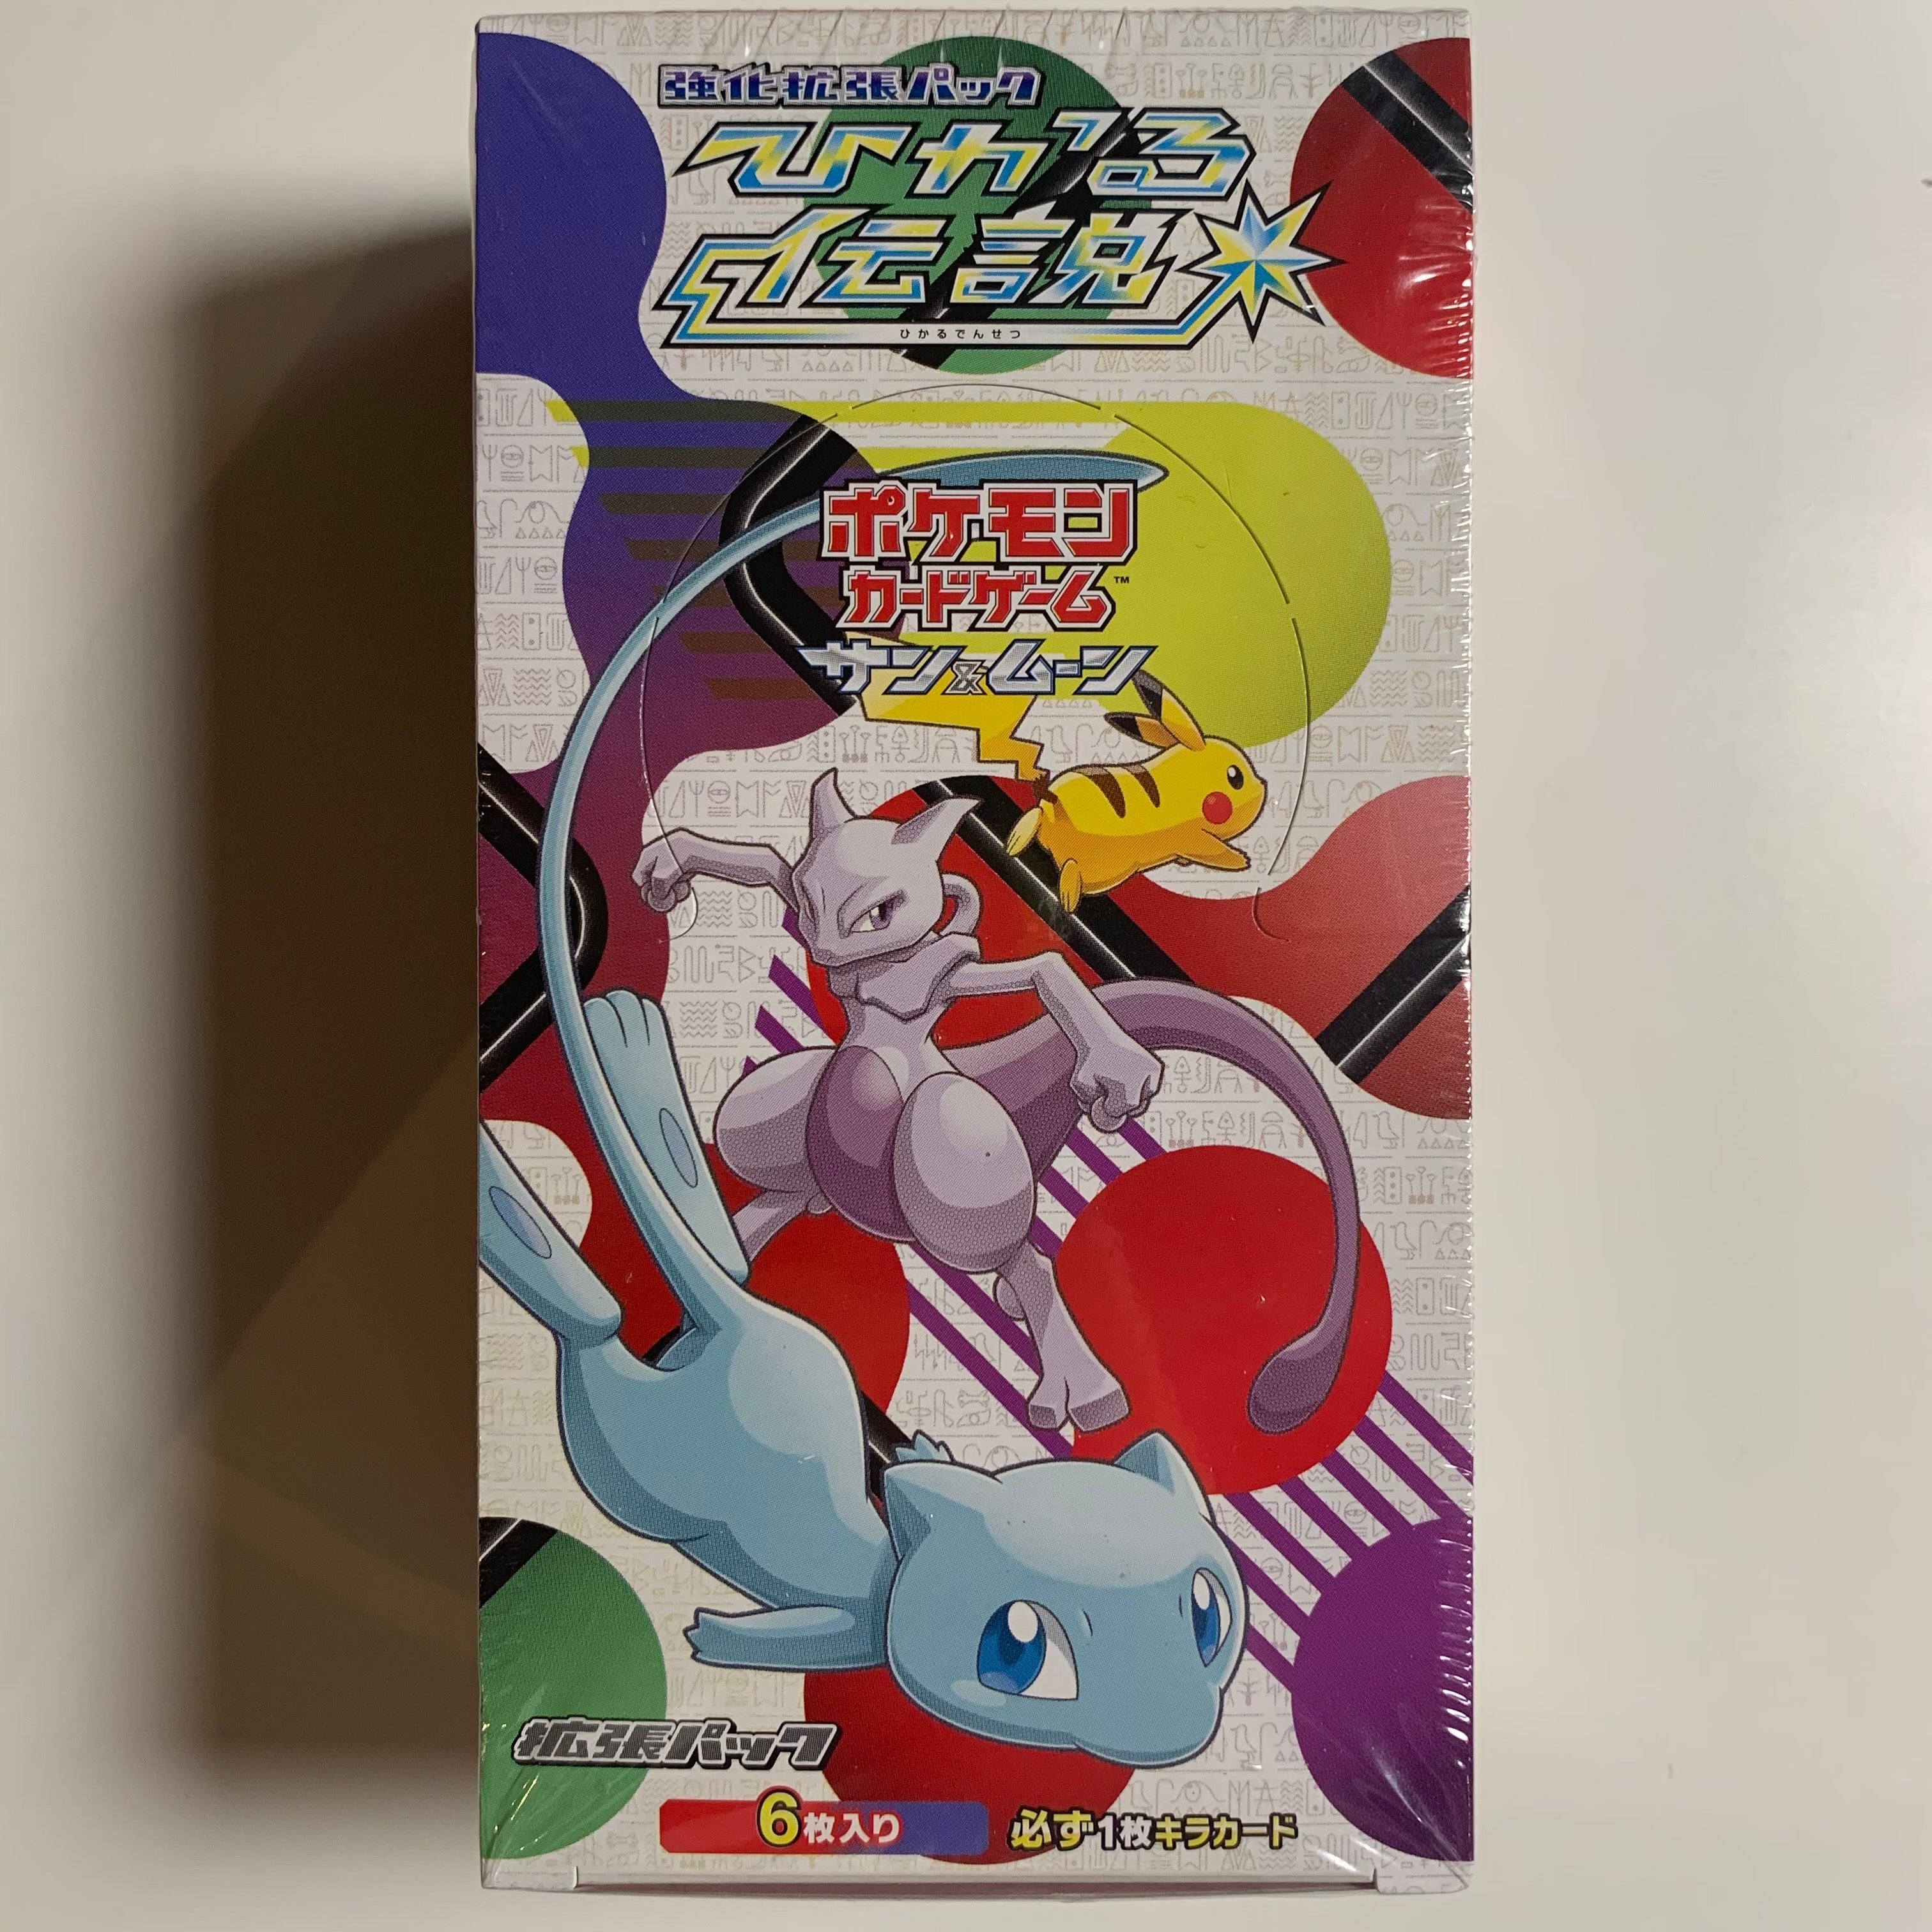 Auction Item 312800927798 TCG Cards 2017 Pokemon Japanese Sun & Moon  Strength Expansion Pack Shining Legends